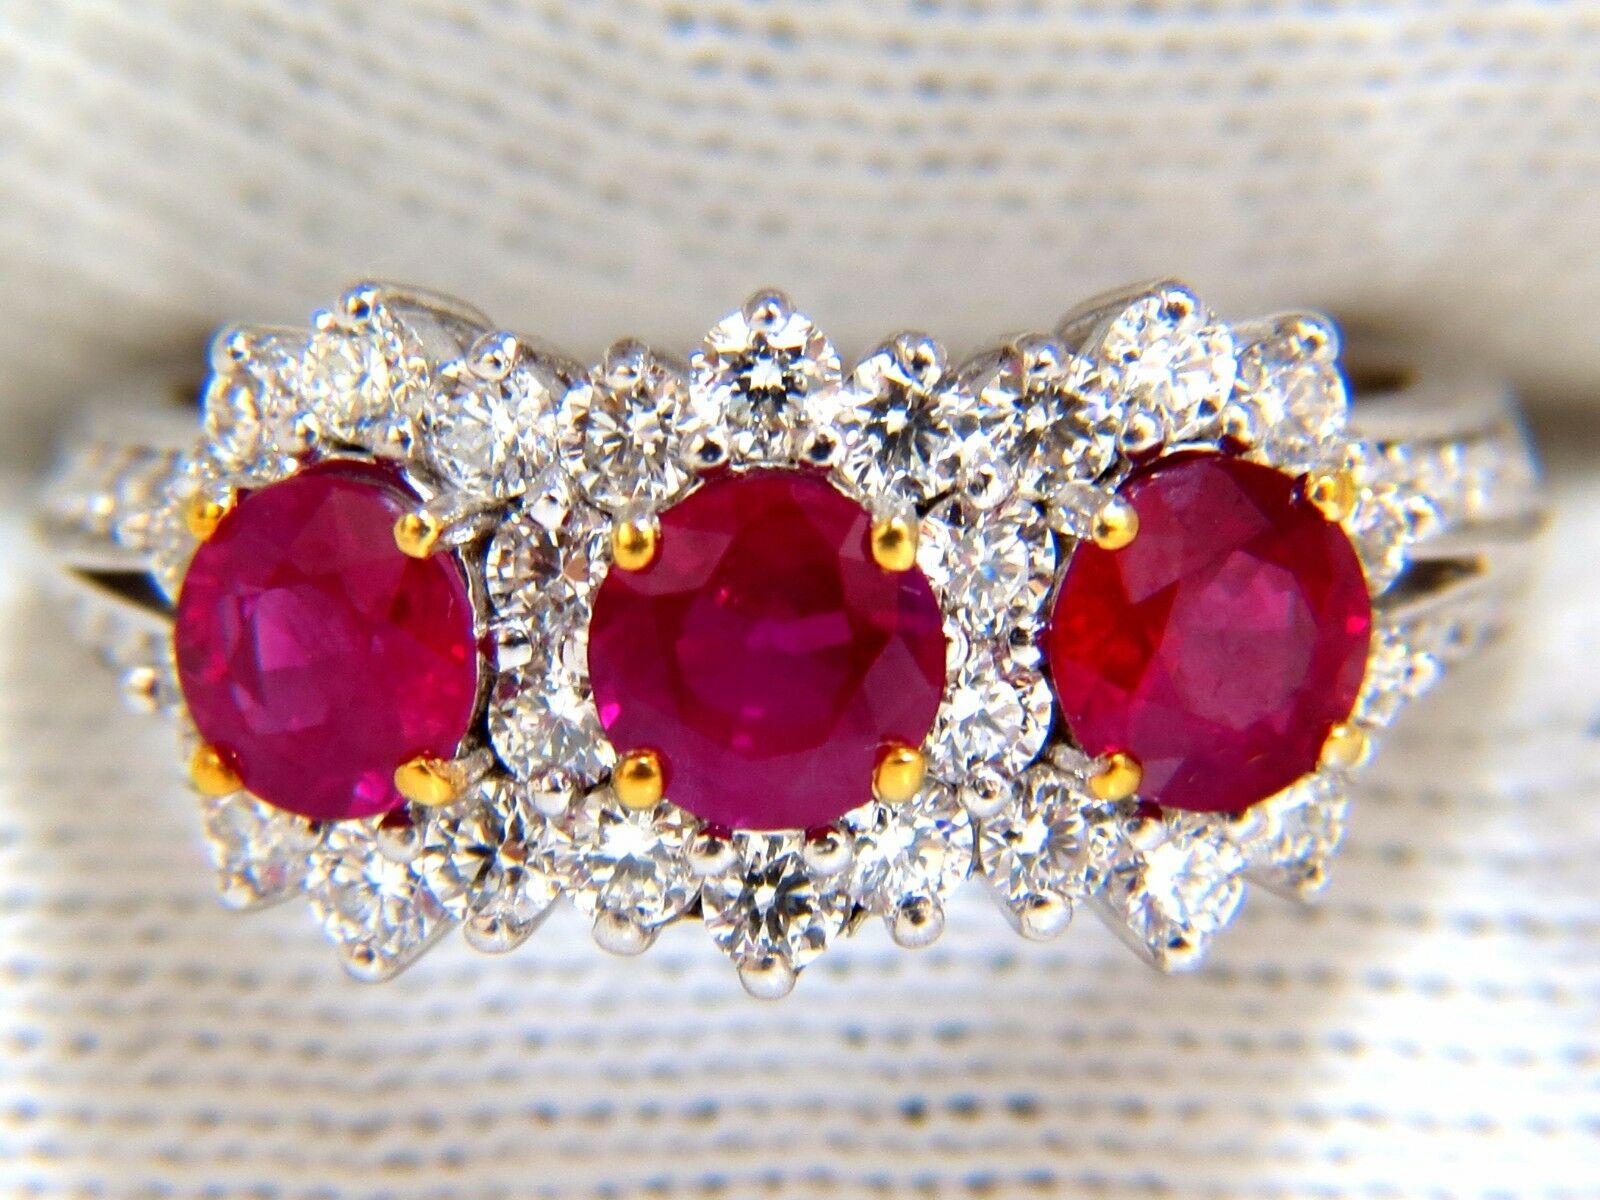 Ruby Halo Three's

1.42ct natural Rubies ring.

Vibrant vivid Reds

Transparent & clean clarity.

Round cut brilliants

4.4mm diameter 

1.00ct natural Side diamonds:

G-color Vs-2 clarity.

14kt. white gold

4.3 grams

Ring Current size: